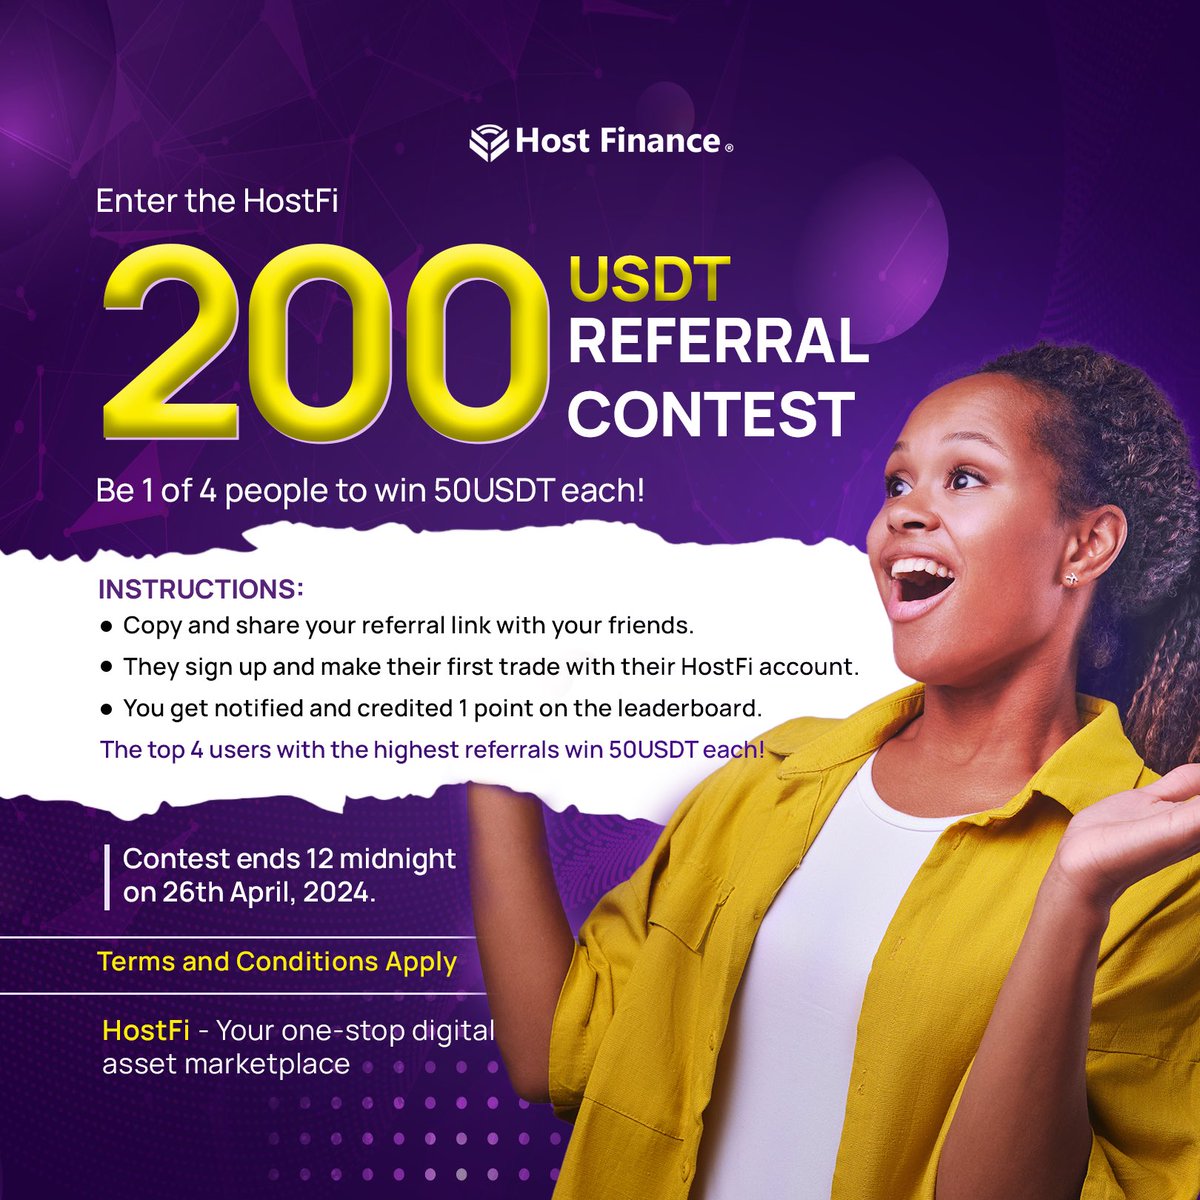 Good news! The HostFi Referral Contest has been extended!